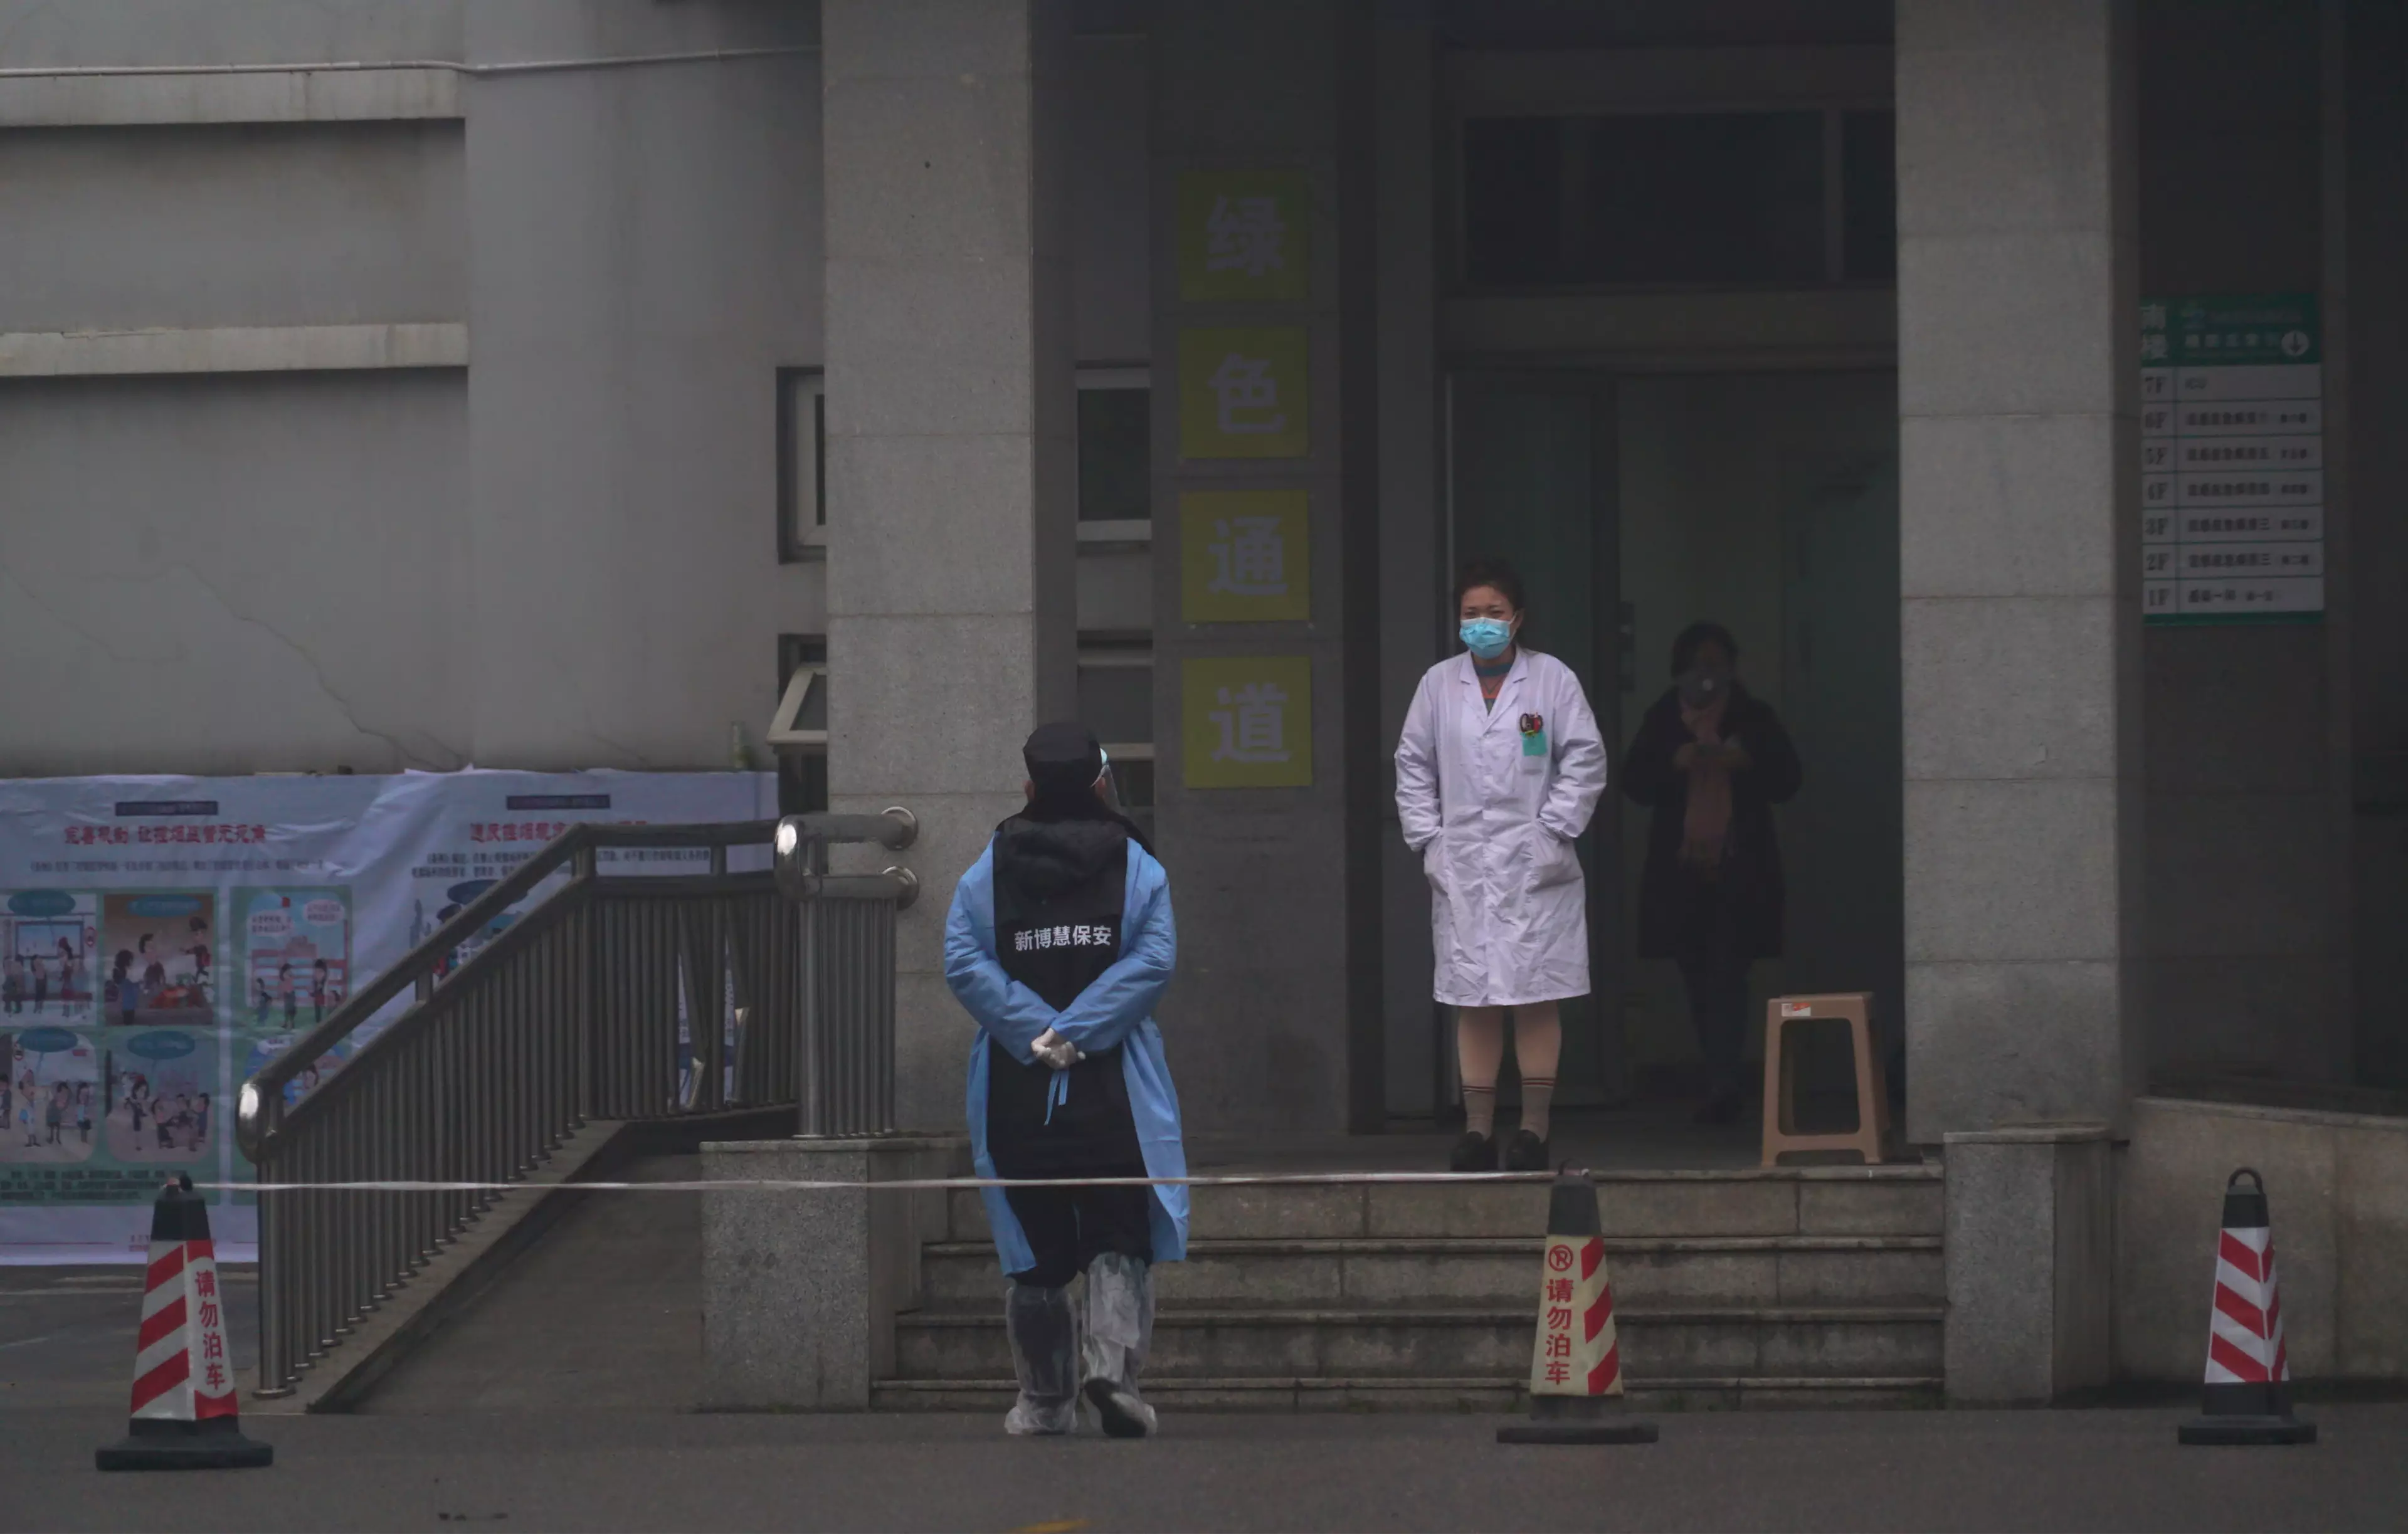 Hospital staff outside the emergency entrance of Wuhan Medical Treatment Center.